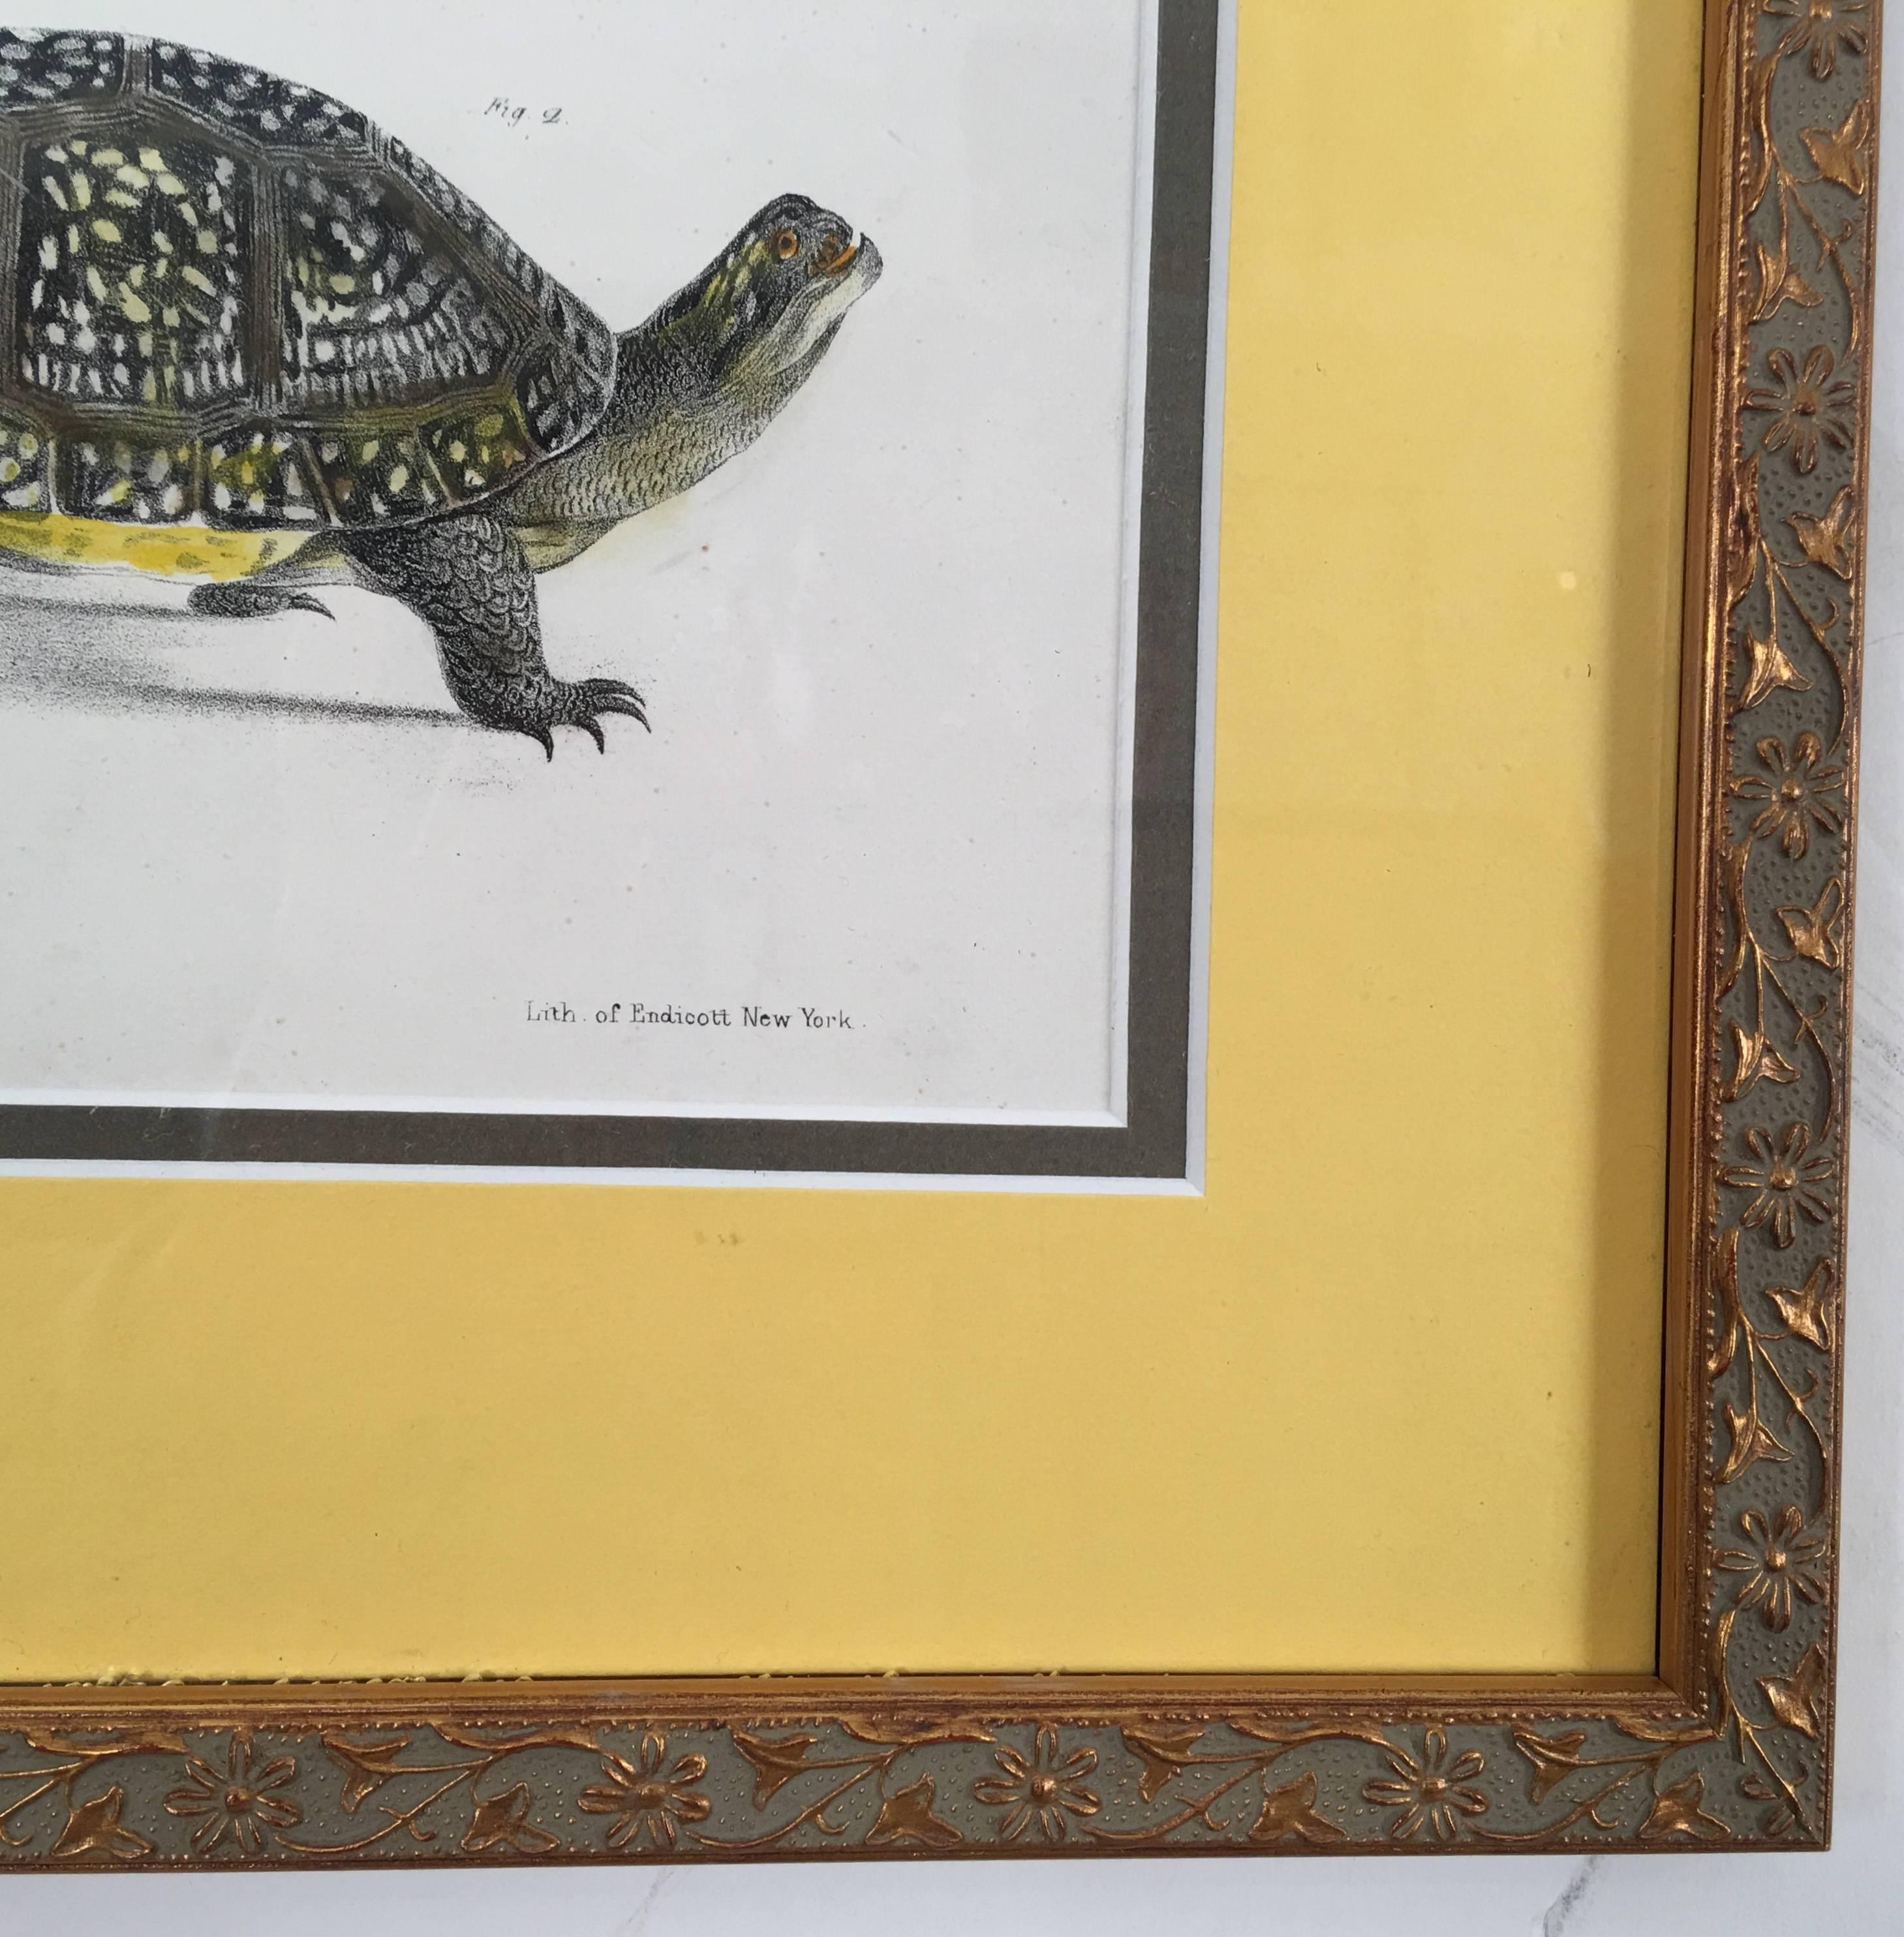 A Pair of framed Turtles - American Realist Print by Unknown